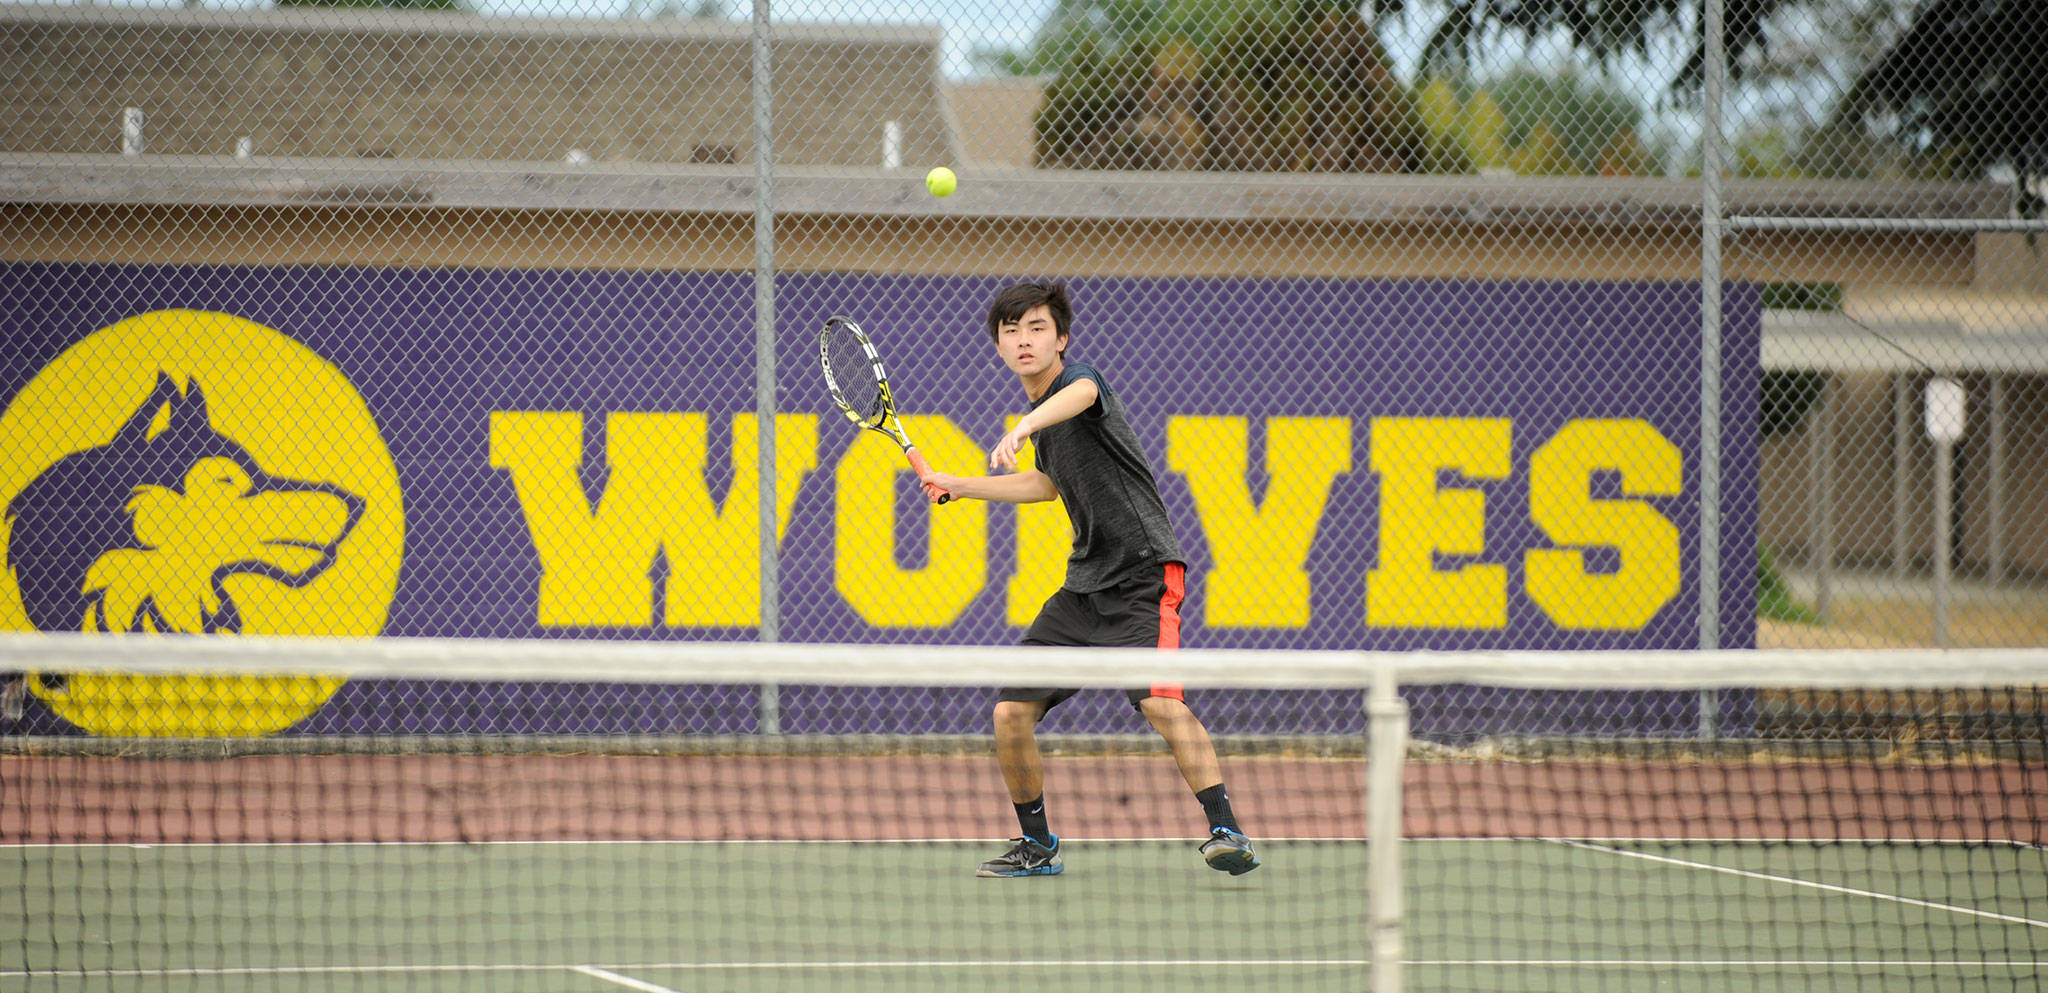 Raymond Lam returns a shot against Blake Wiker in the A Division finals on July 27. Wiker won in straight sets. Sequim Gazette photo by Michael Dashiell